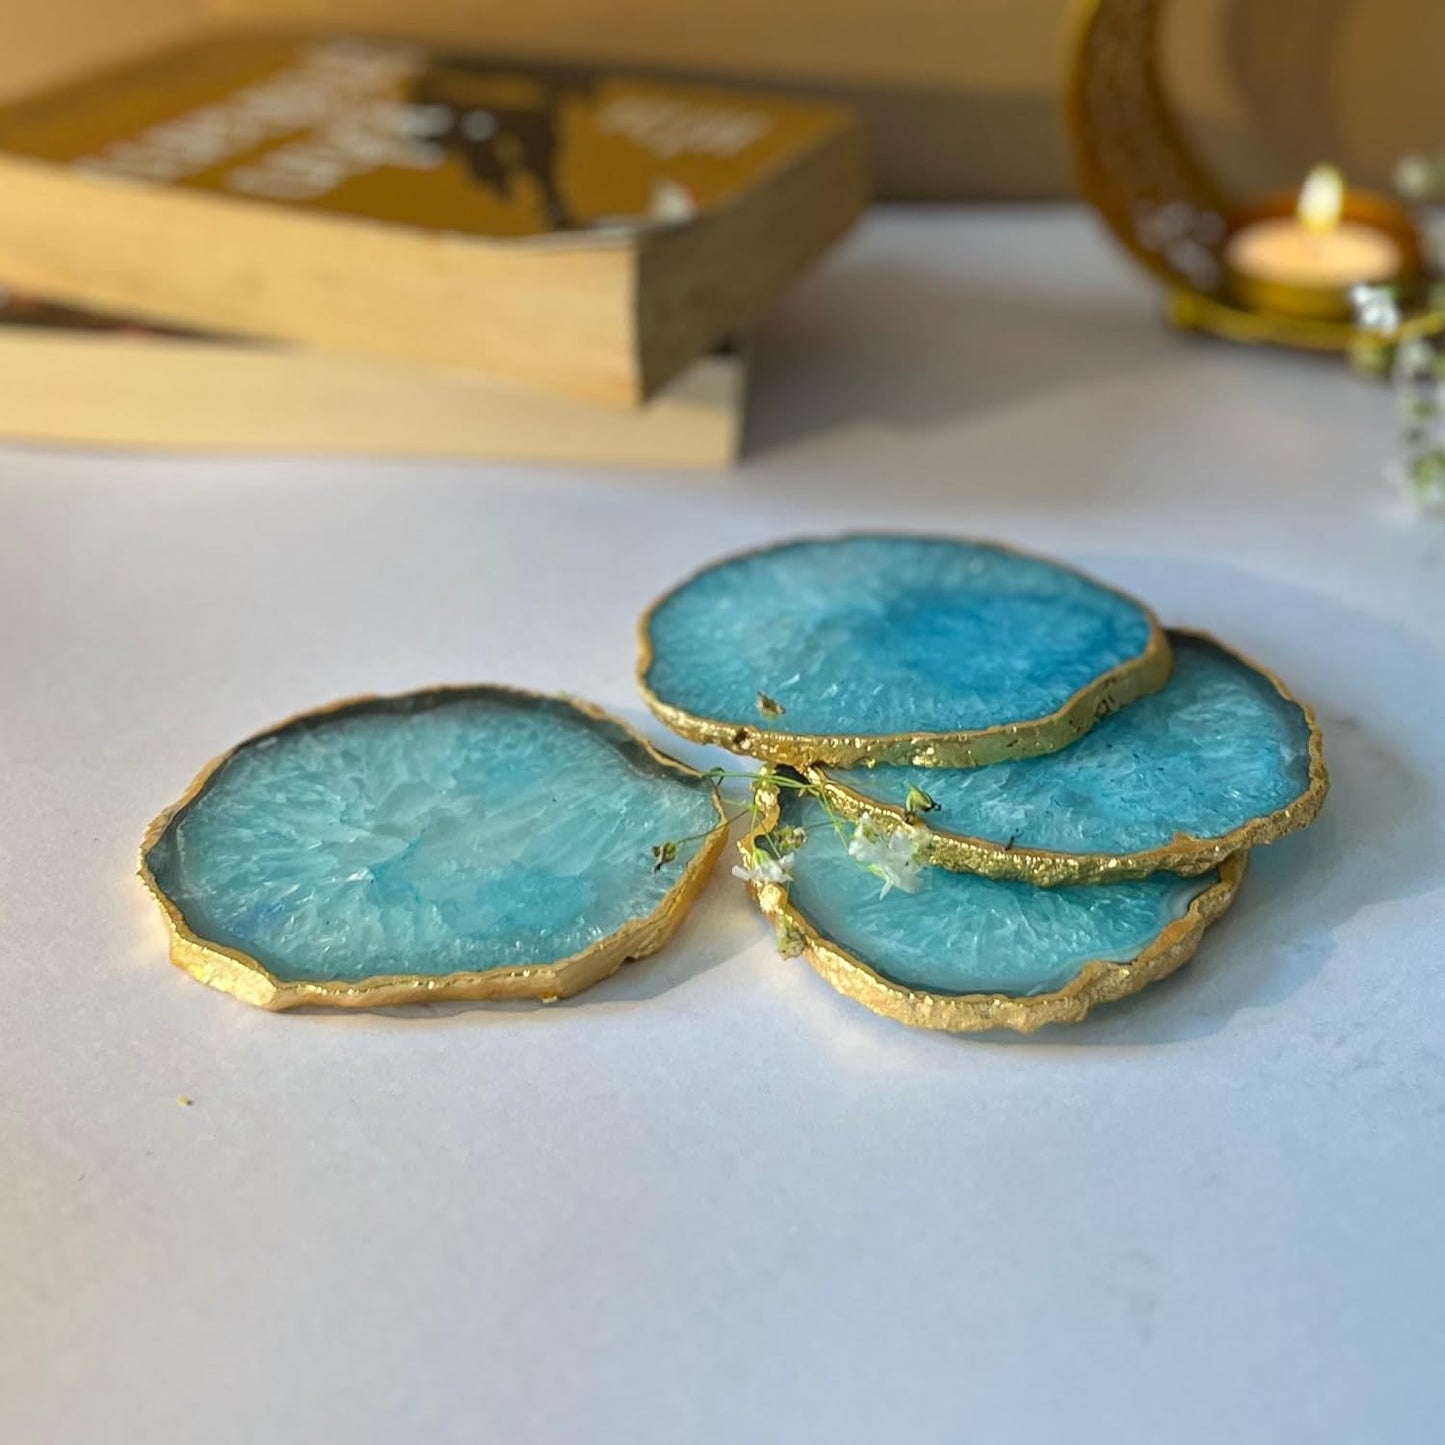 Agate Stone Coasters Gold Platted Set of 4 for Home Table Decor and Housewarming Gift